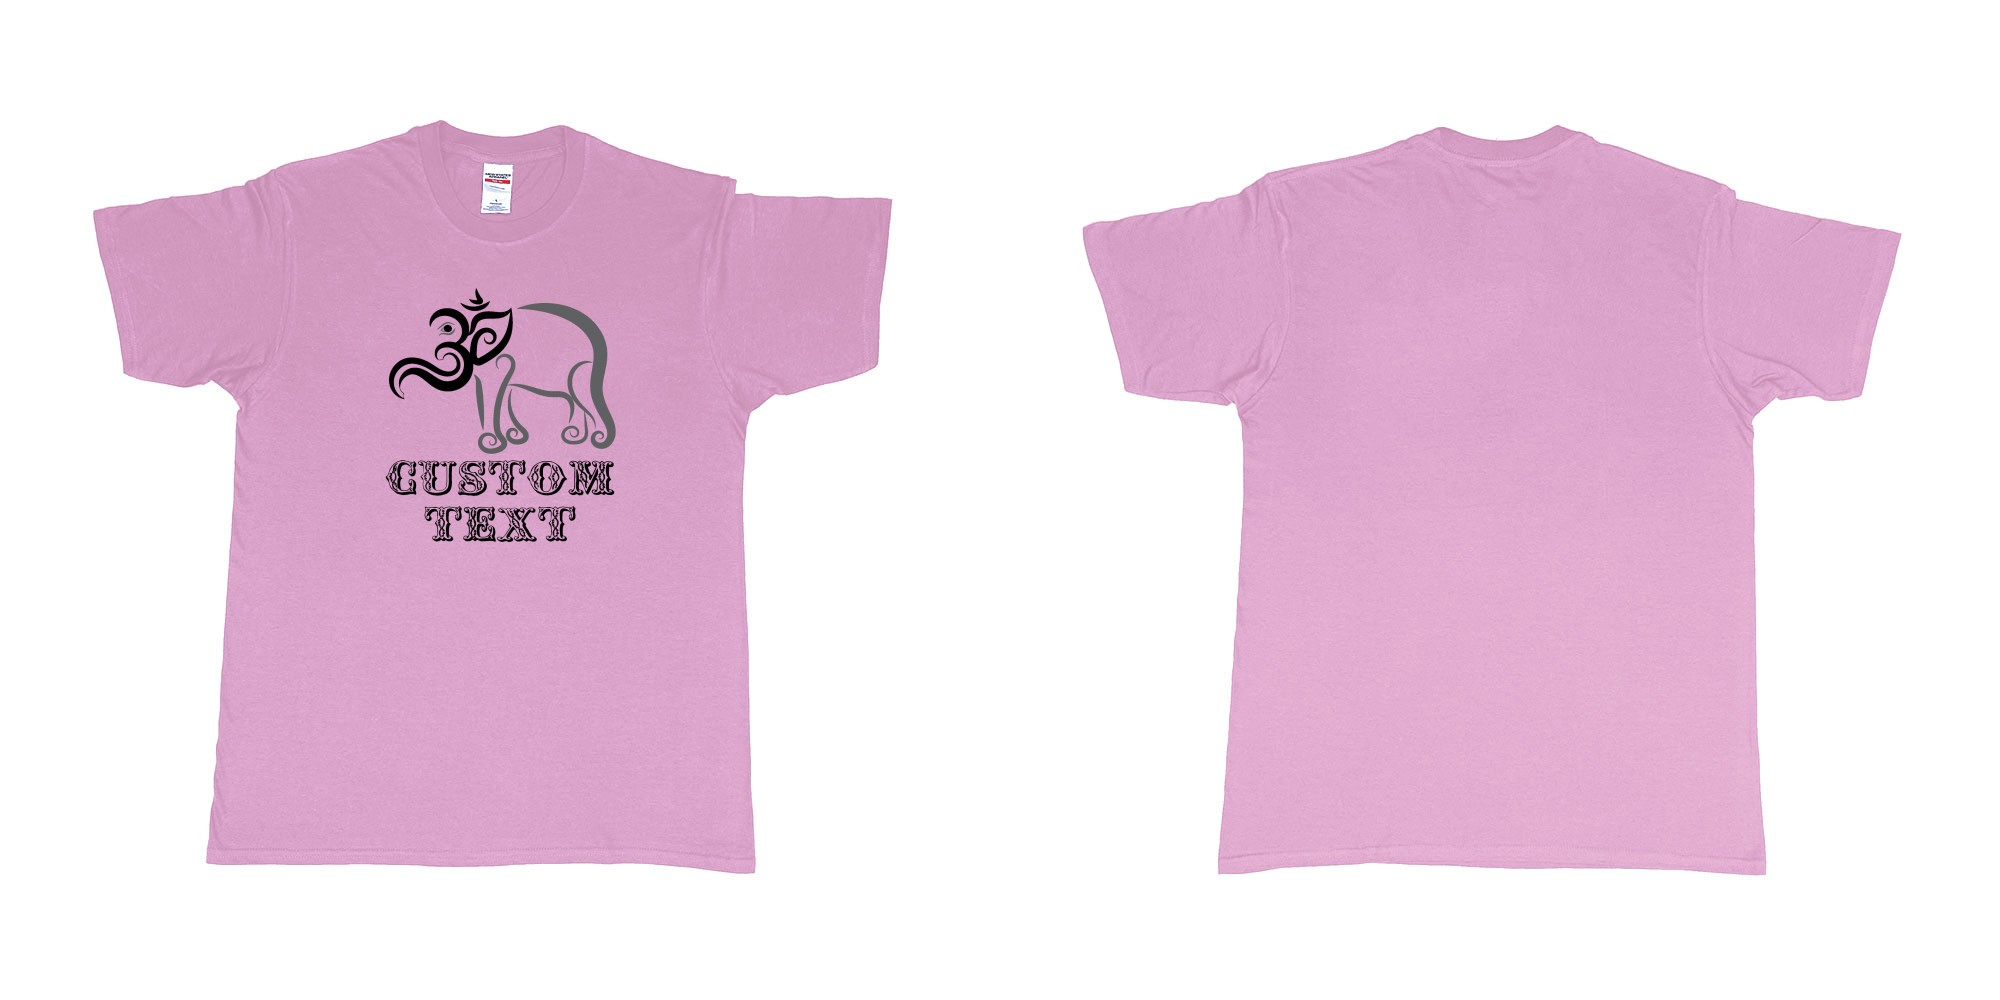 Custom tshirt design om elephant design in fabric color light-pink choice your own text made in Bali by The Pirate Way